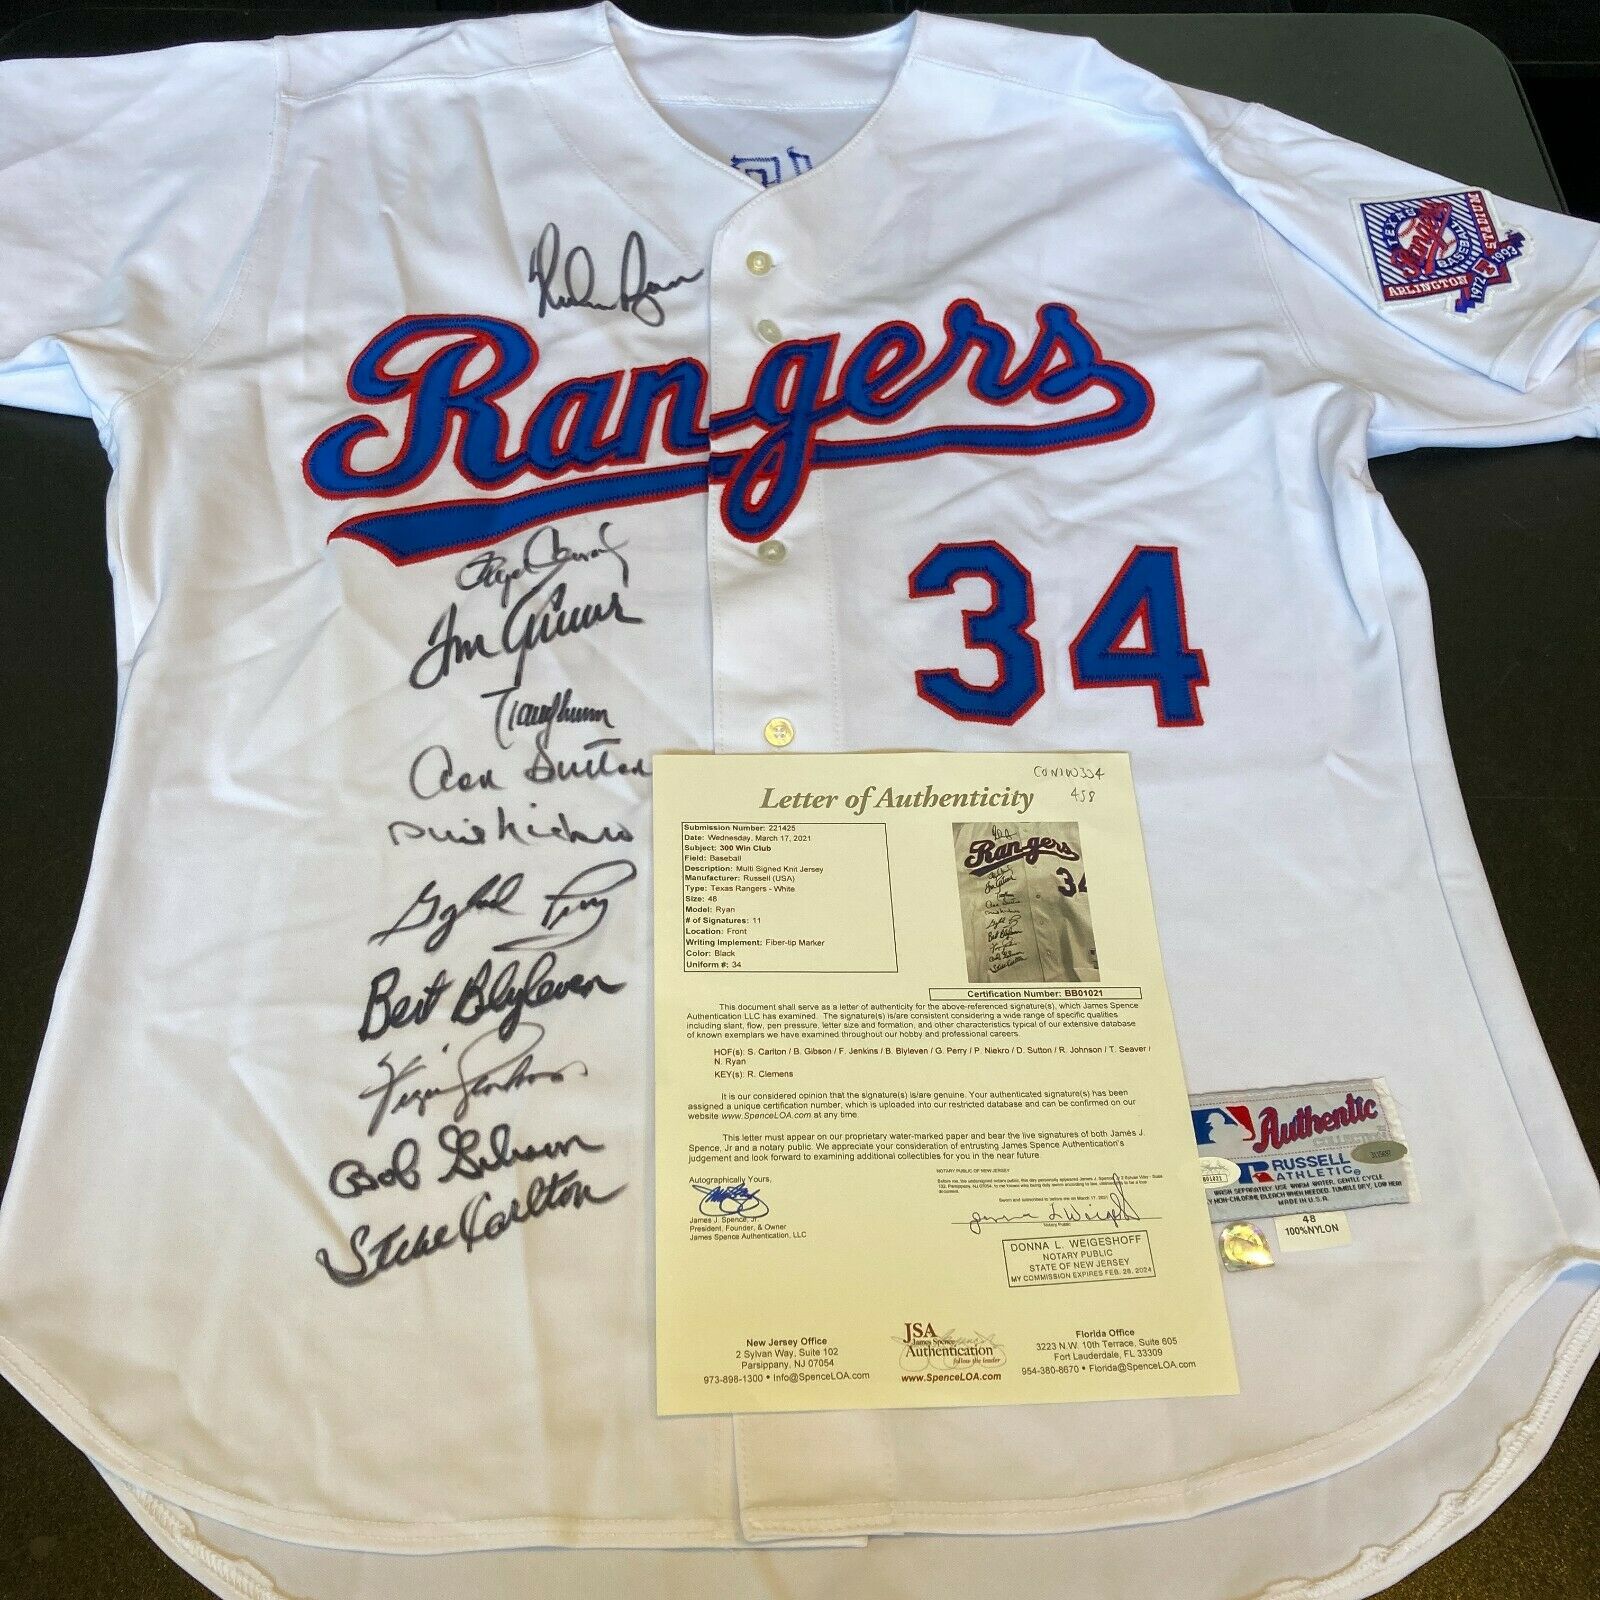 Tom Seaver Autographed Professional Jersey W/ Tags From 